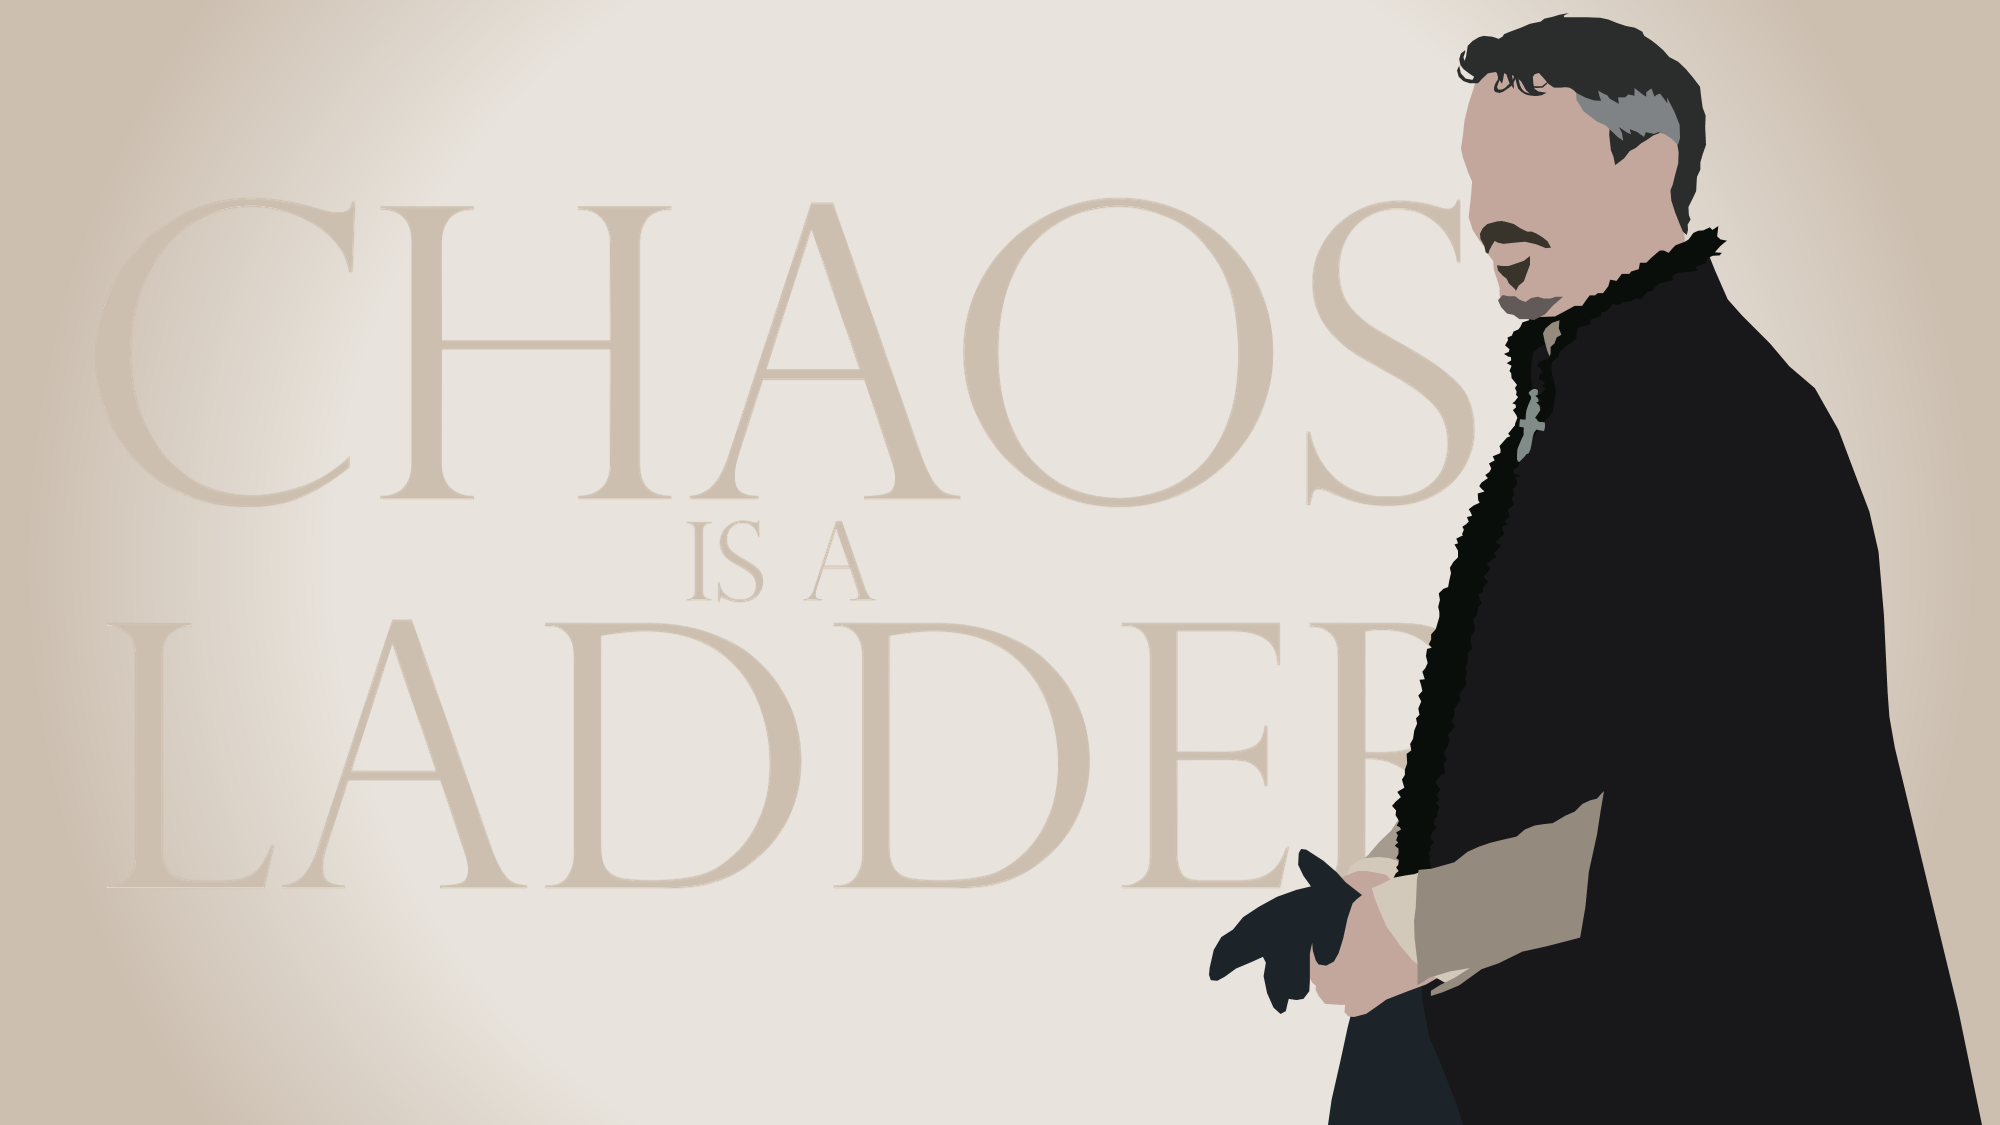 Chaos is a Ladder by Reverendtundra on DeviantArt